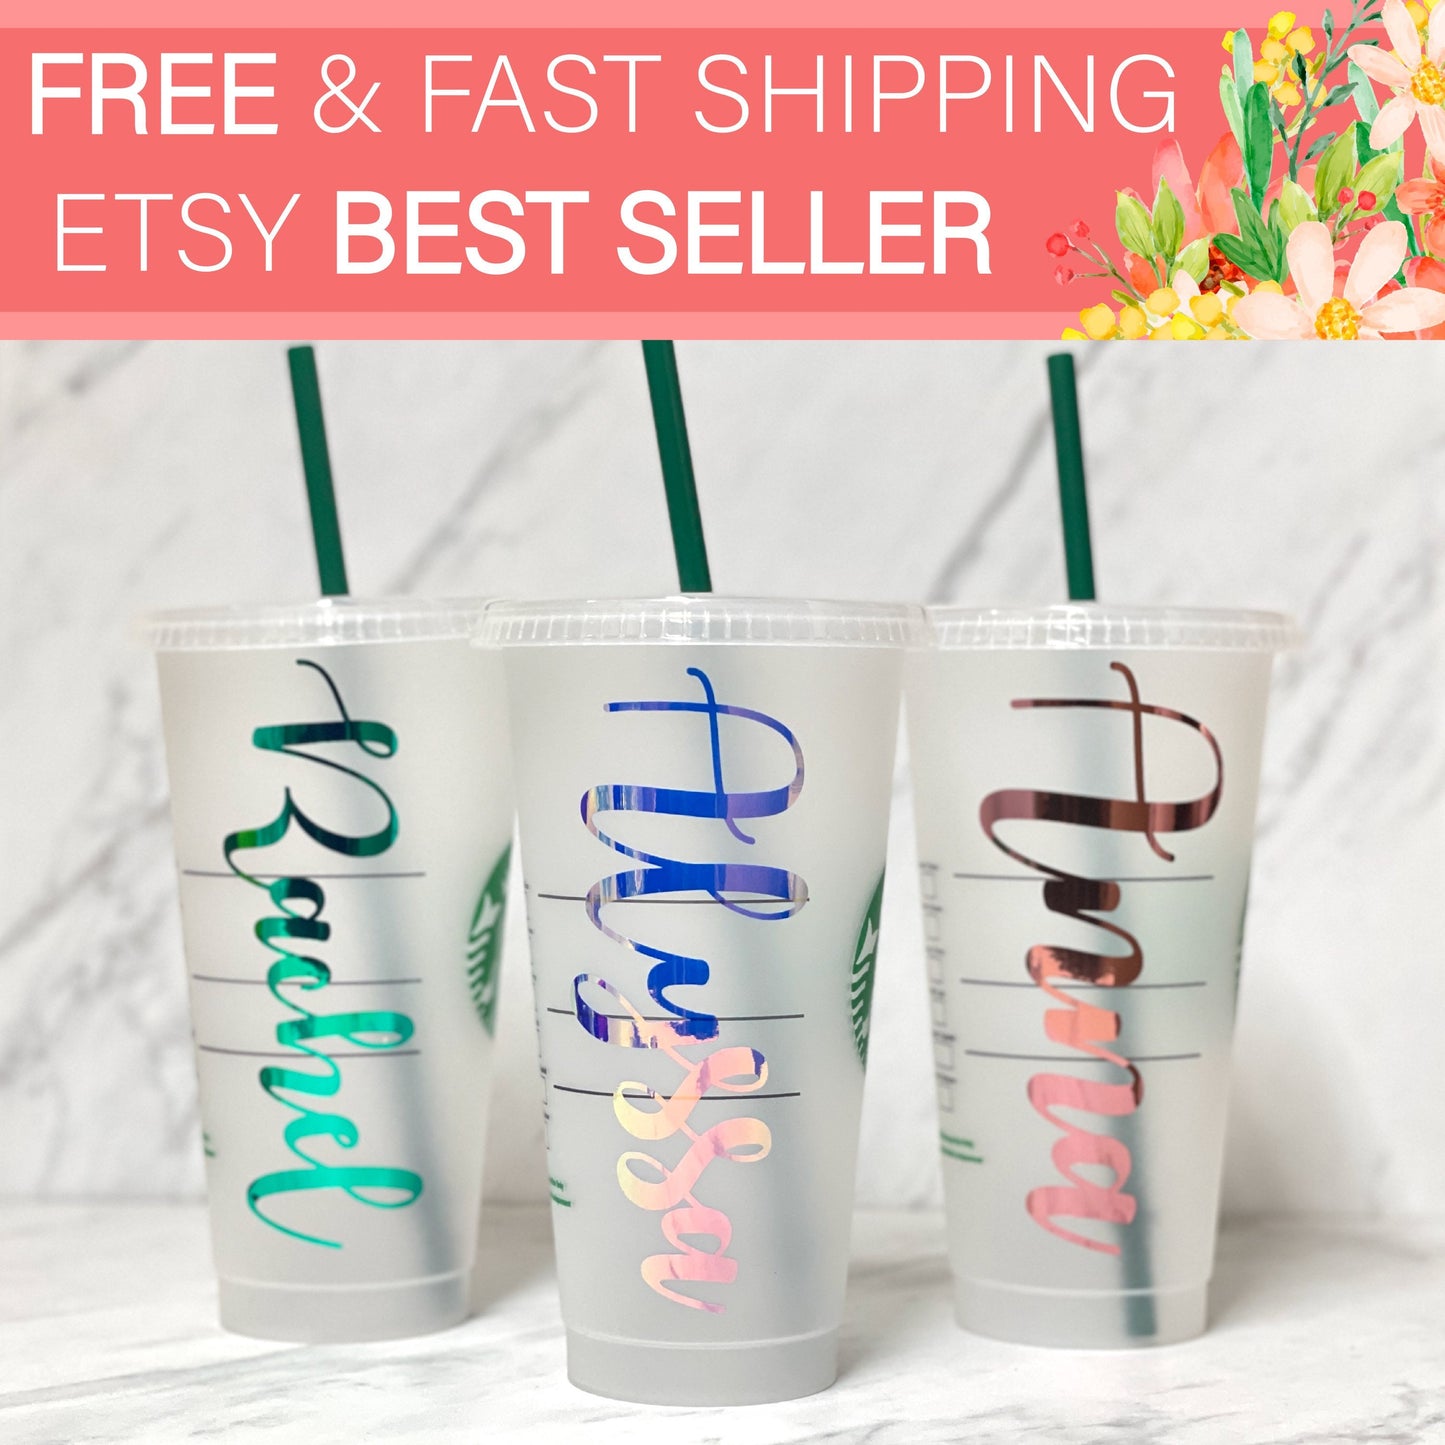 Personalized Starbucks Cup/ Personalized Christmas gift/Stocking